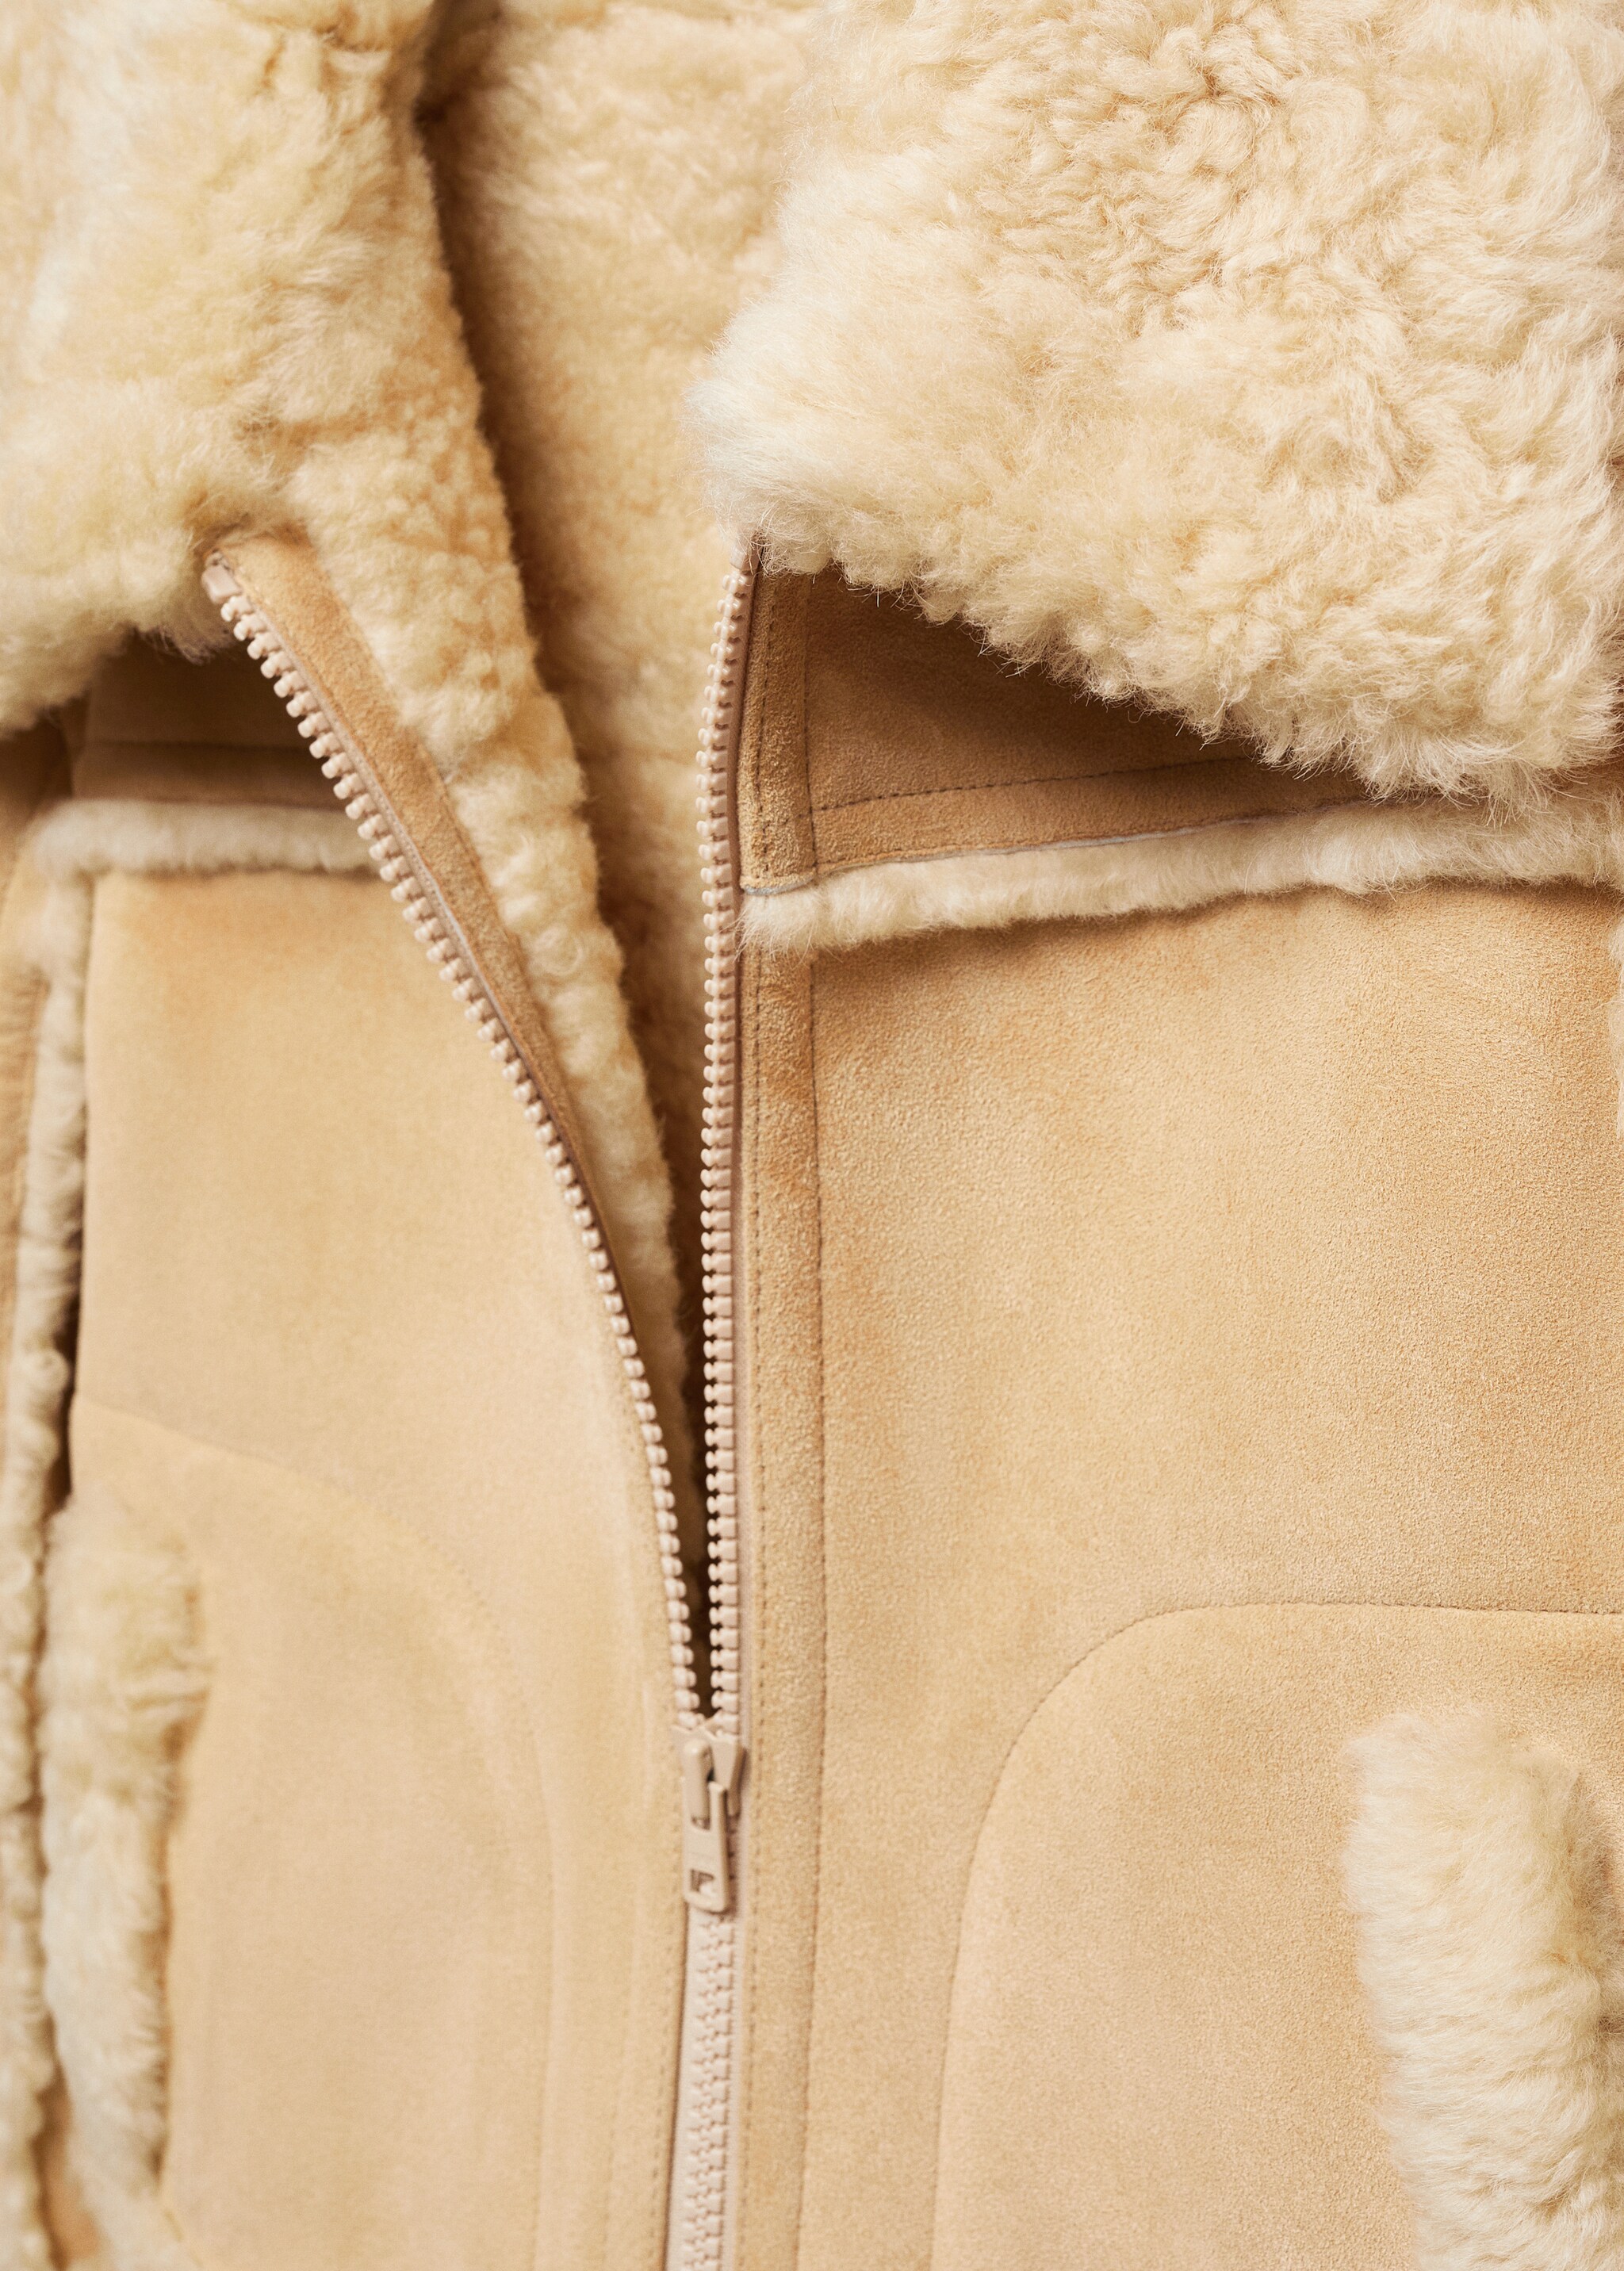 Shearling-lined leather jacket - Details of the article 8